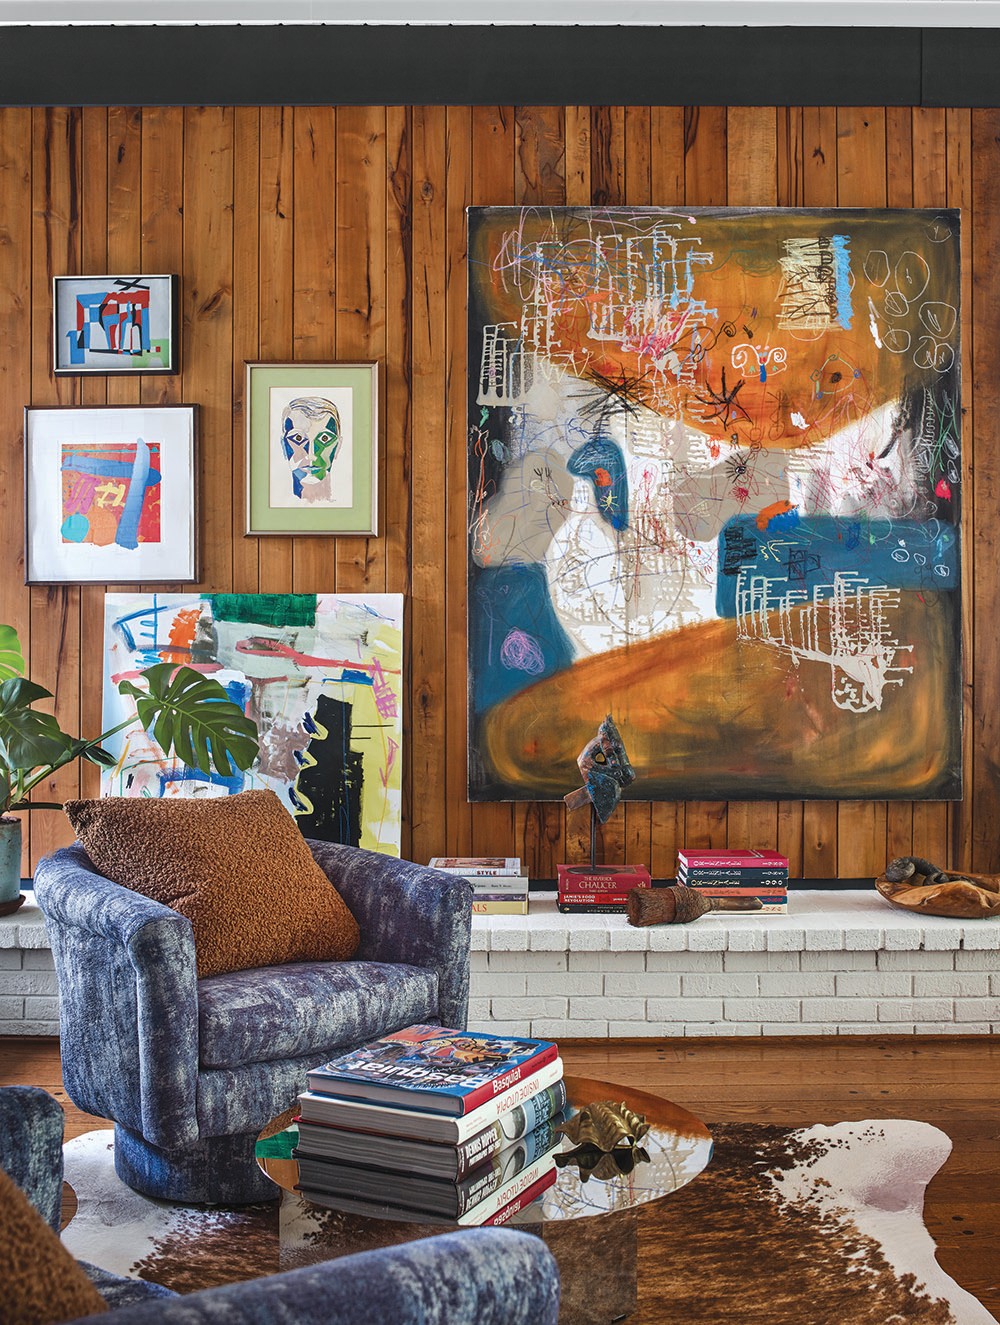 A close-up view of the living room designed by Jessica Davis shows how layering colorful artwork works